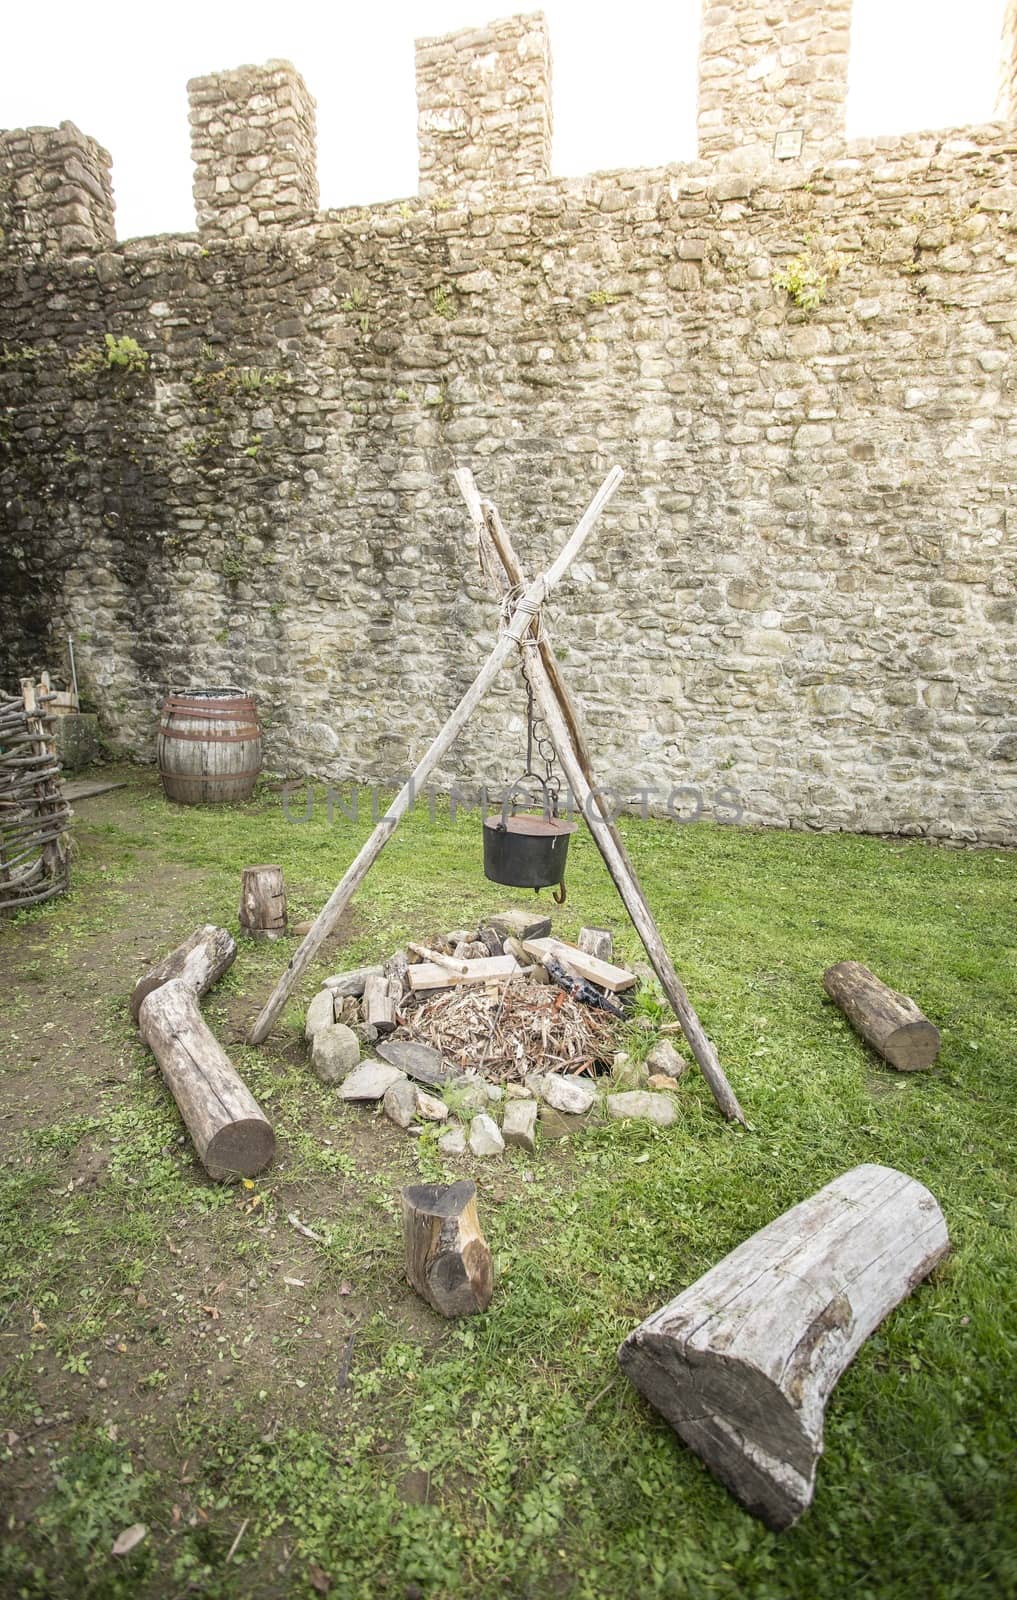 A medieval campfire with stone walls in the background